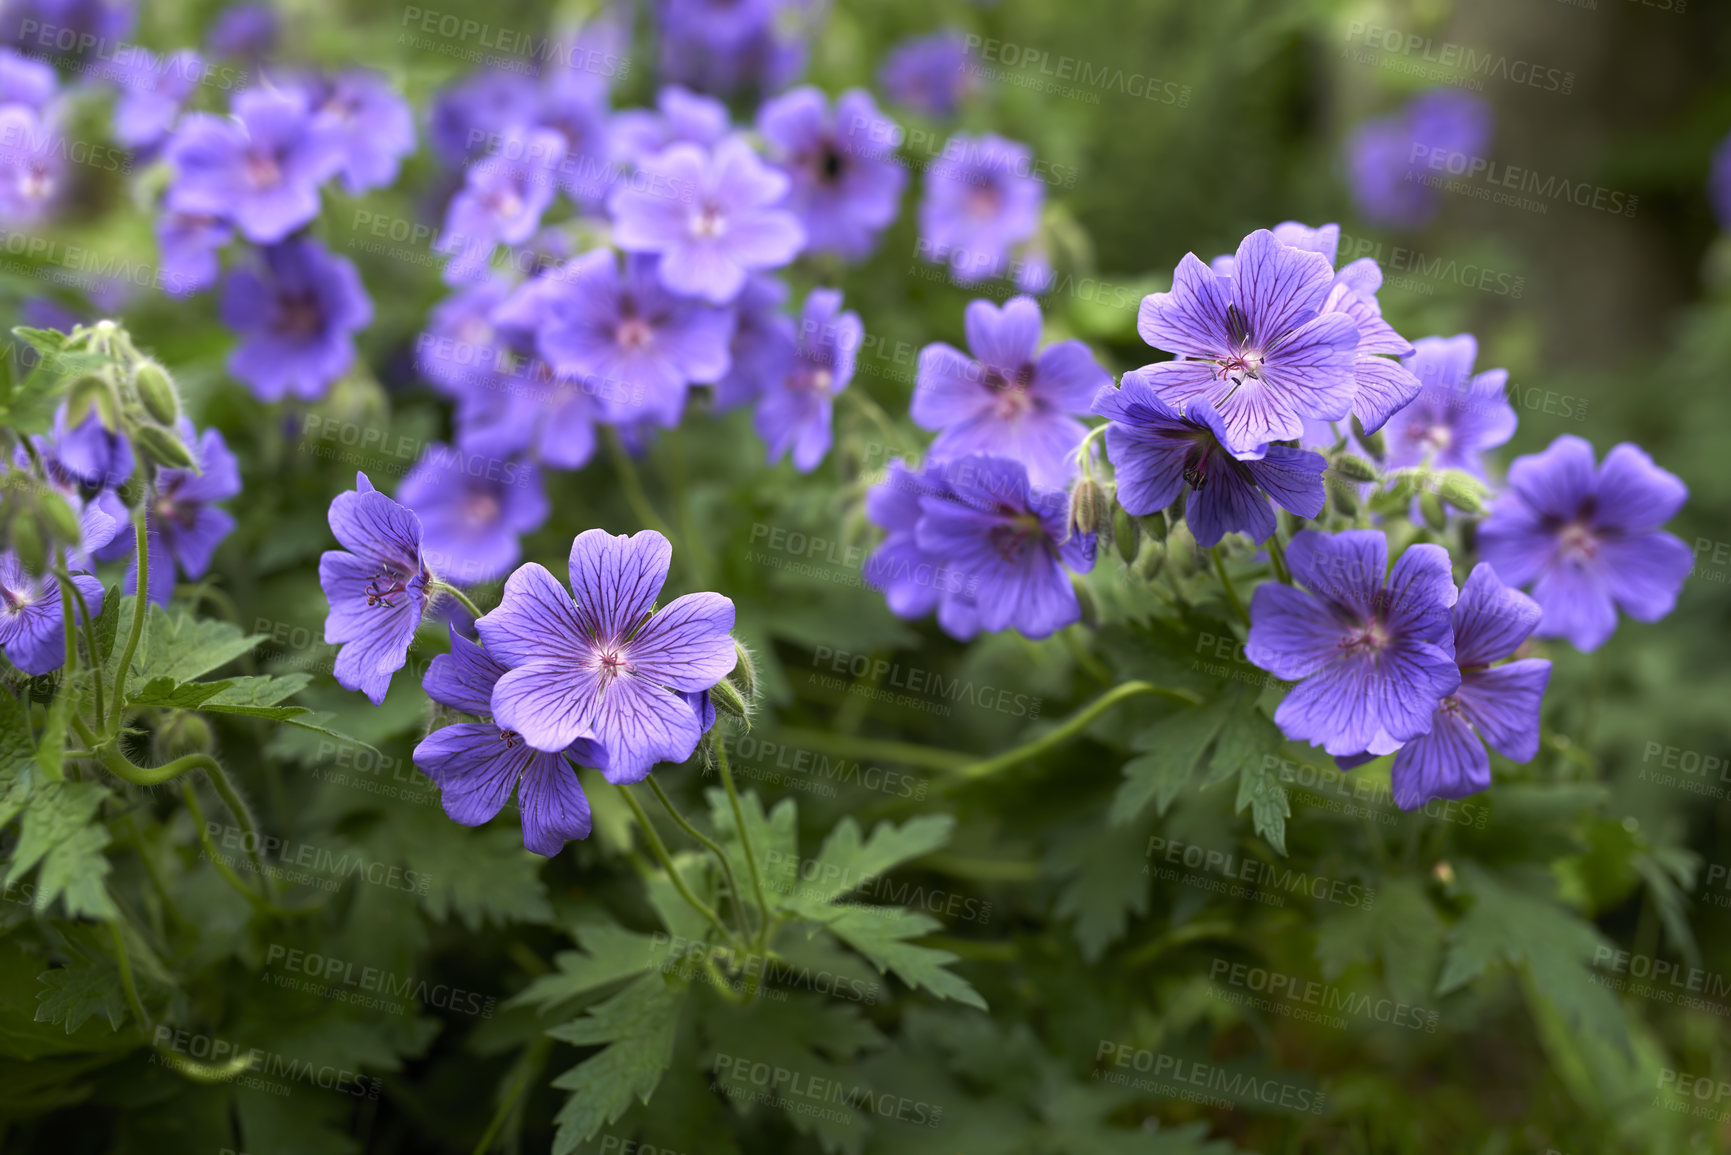 Buy stock photo Closeup of purple cranesbill flowers growing and flowering on a green bush or shrub in a remote field, meadow or home garden. Textured detail of perennial plants blossoming and blooming in backyard